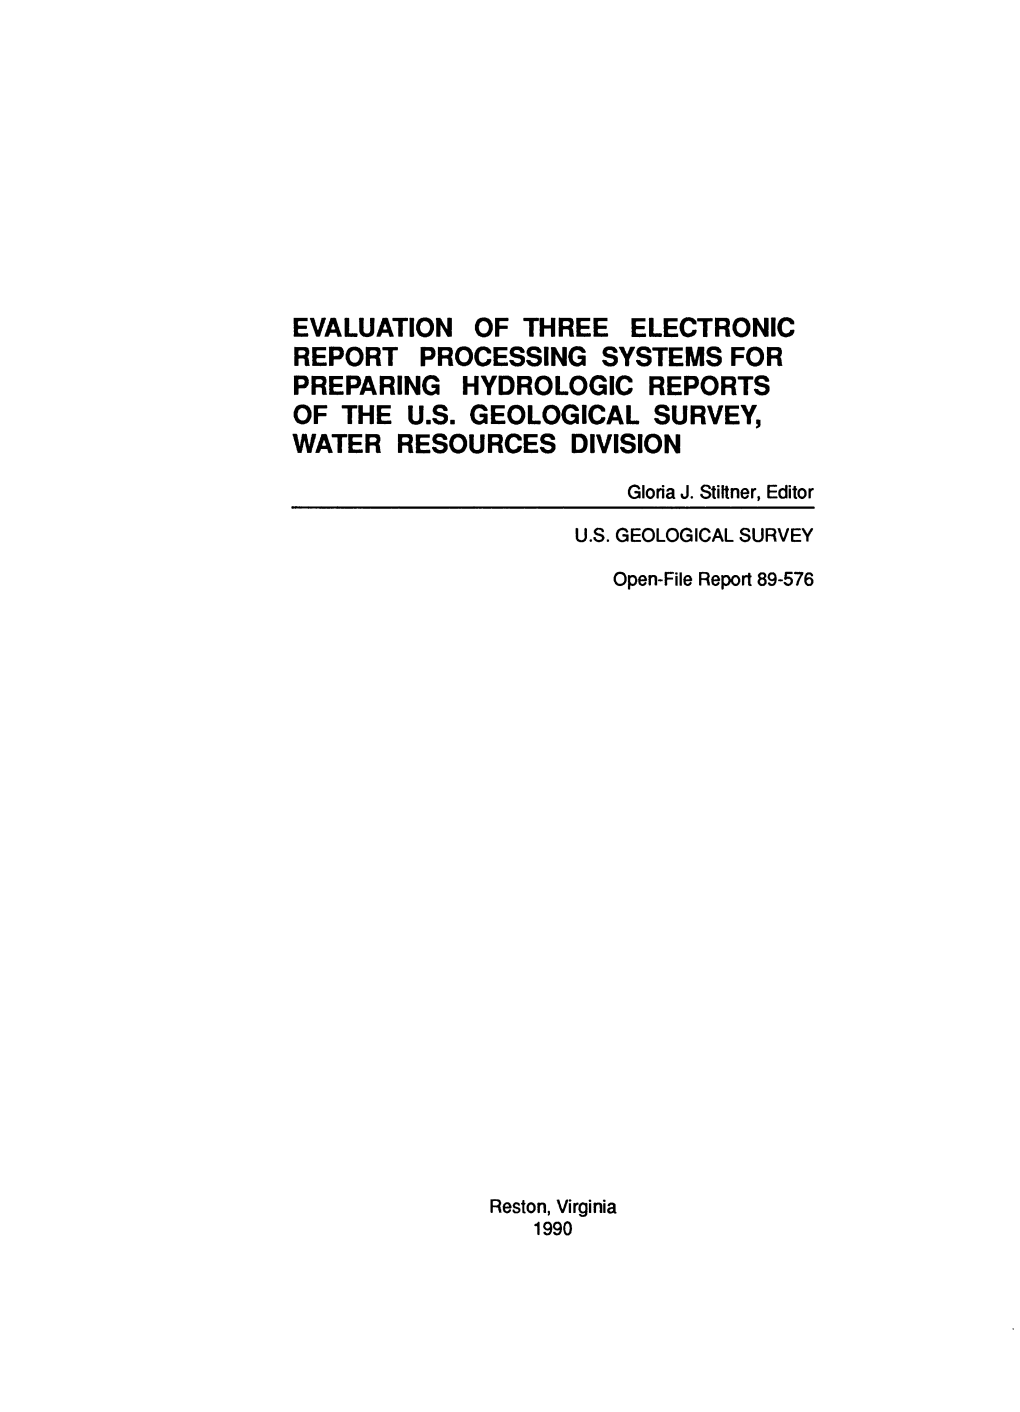 Evaluation of Three Electronic Report Processing Systems for Preparing Hydrologic Reports of the U.S